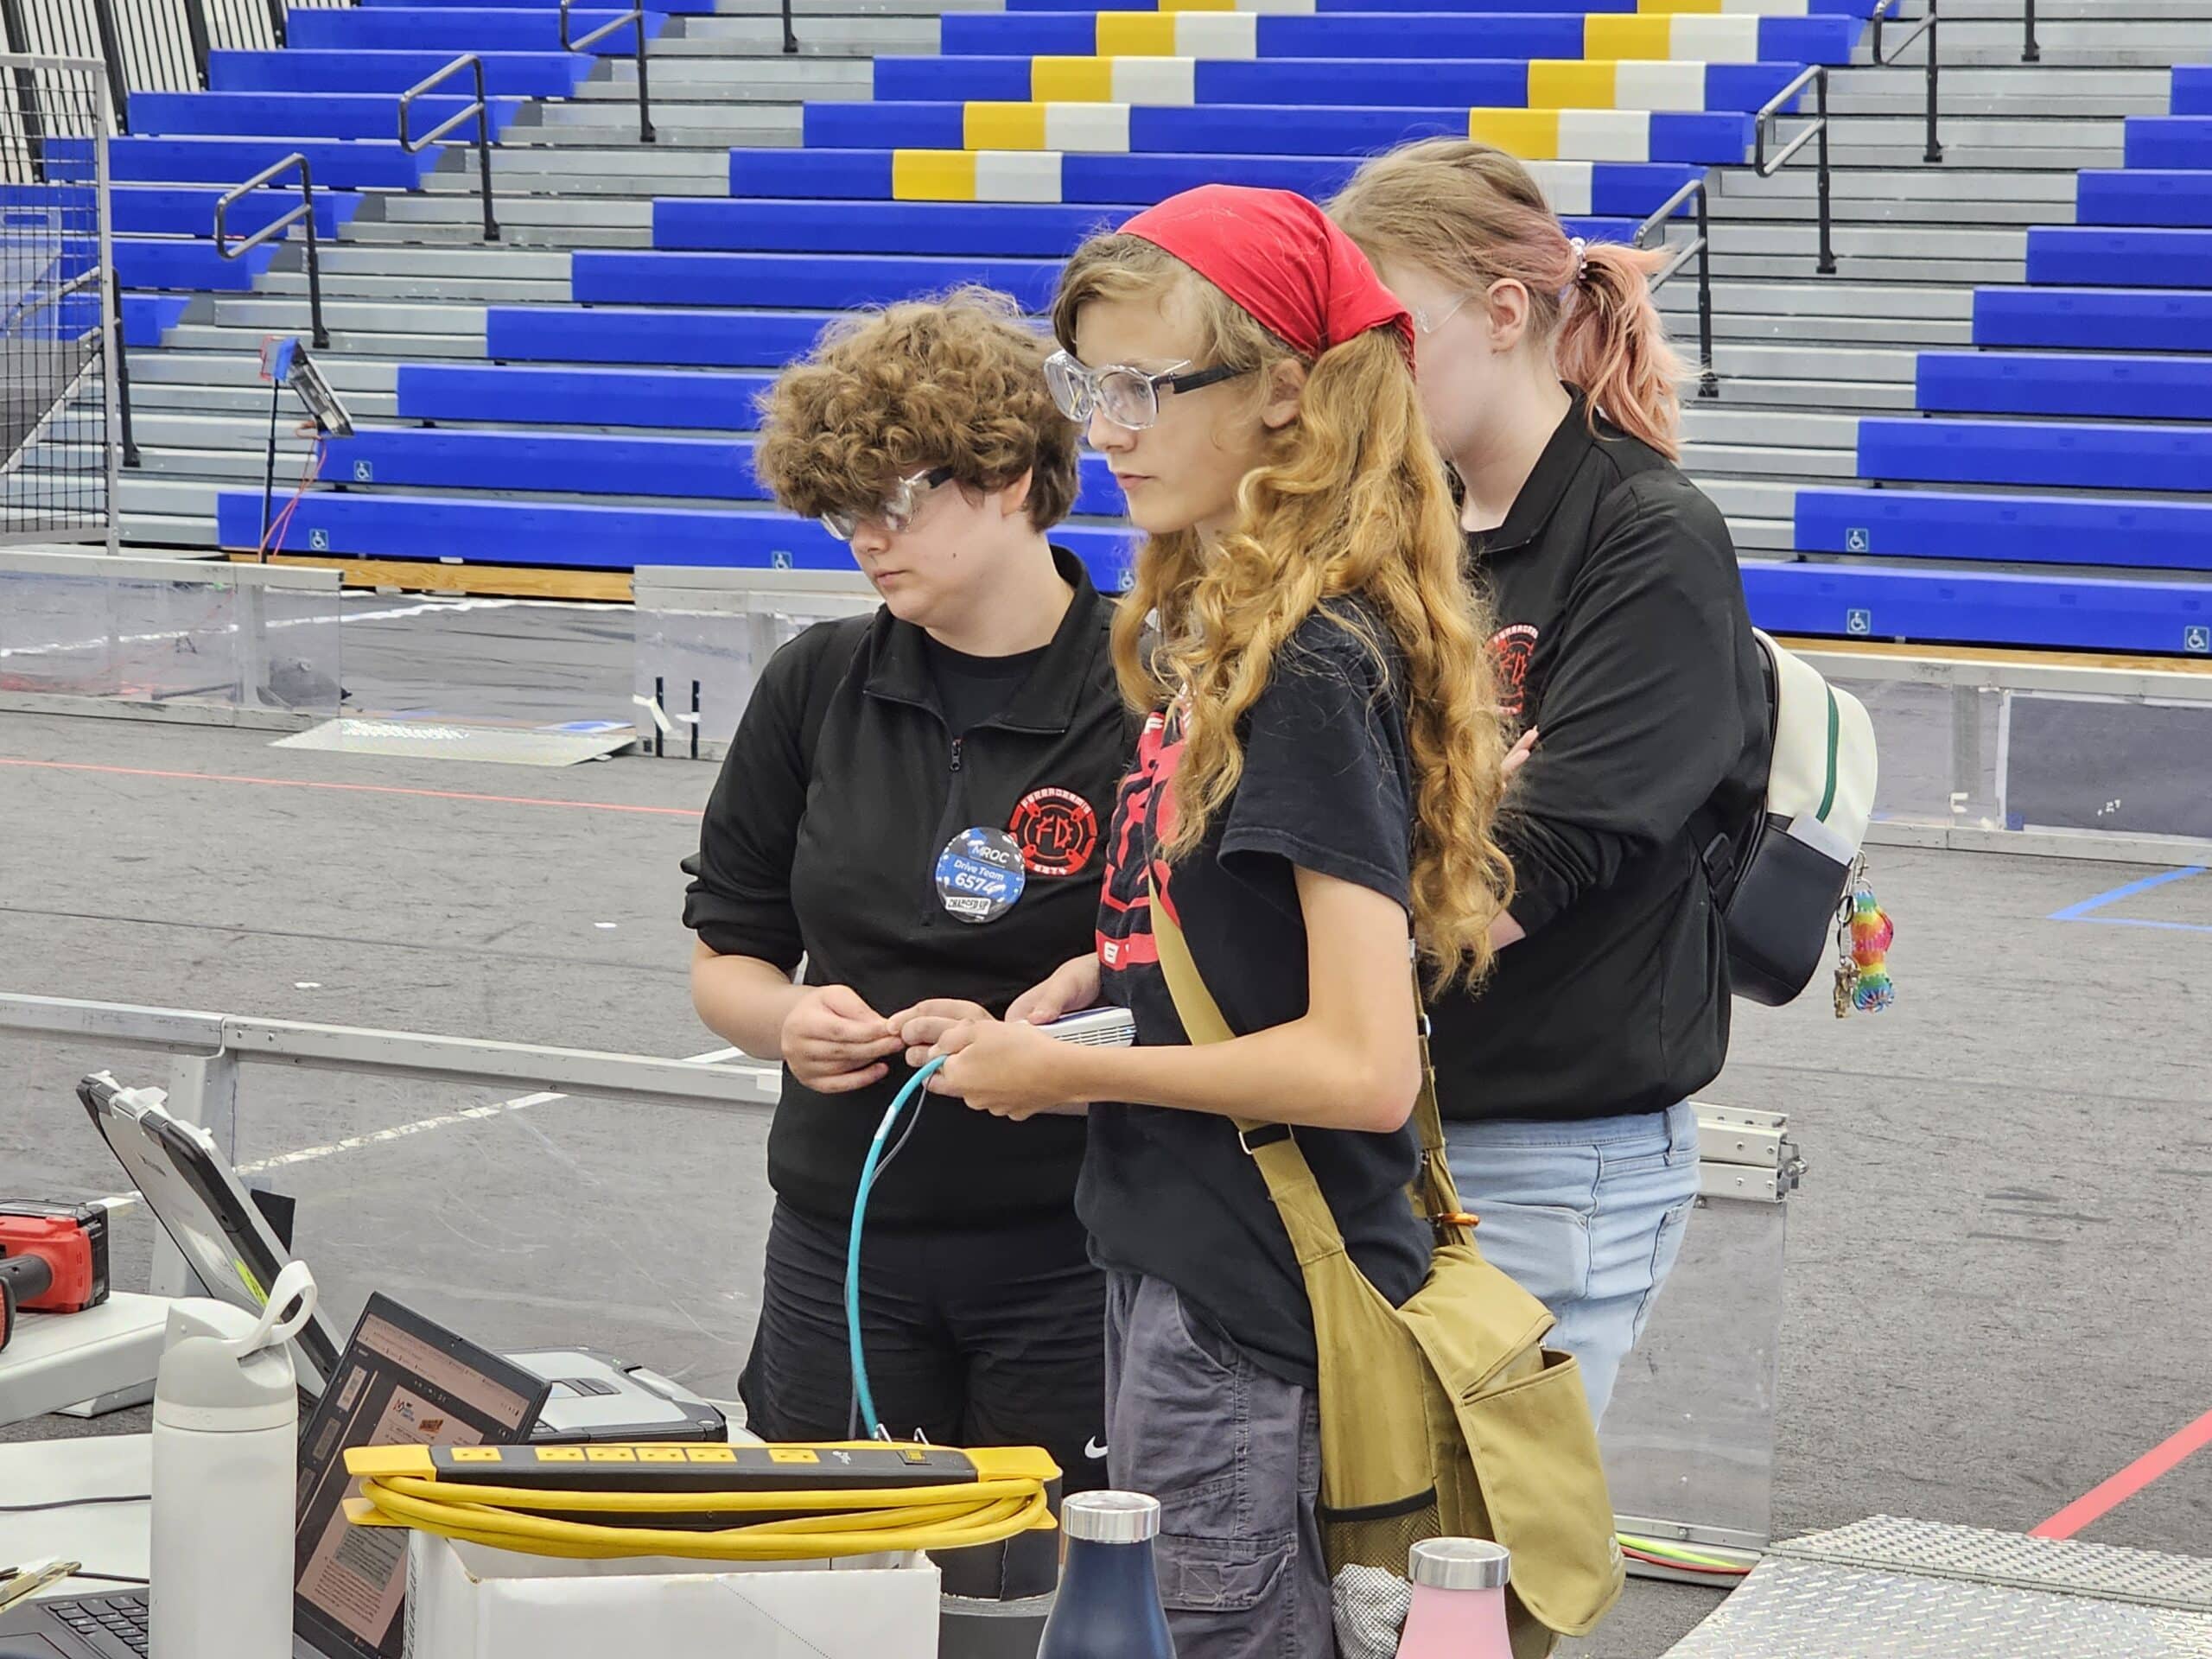 Pit Crew members take care of flashing the robot's radio to connect to the field system